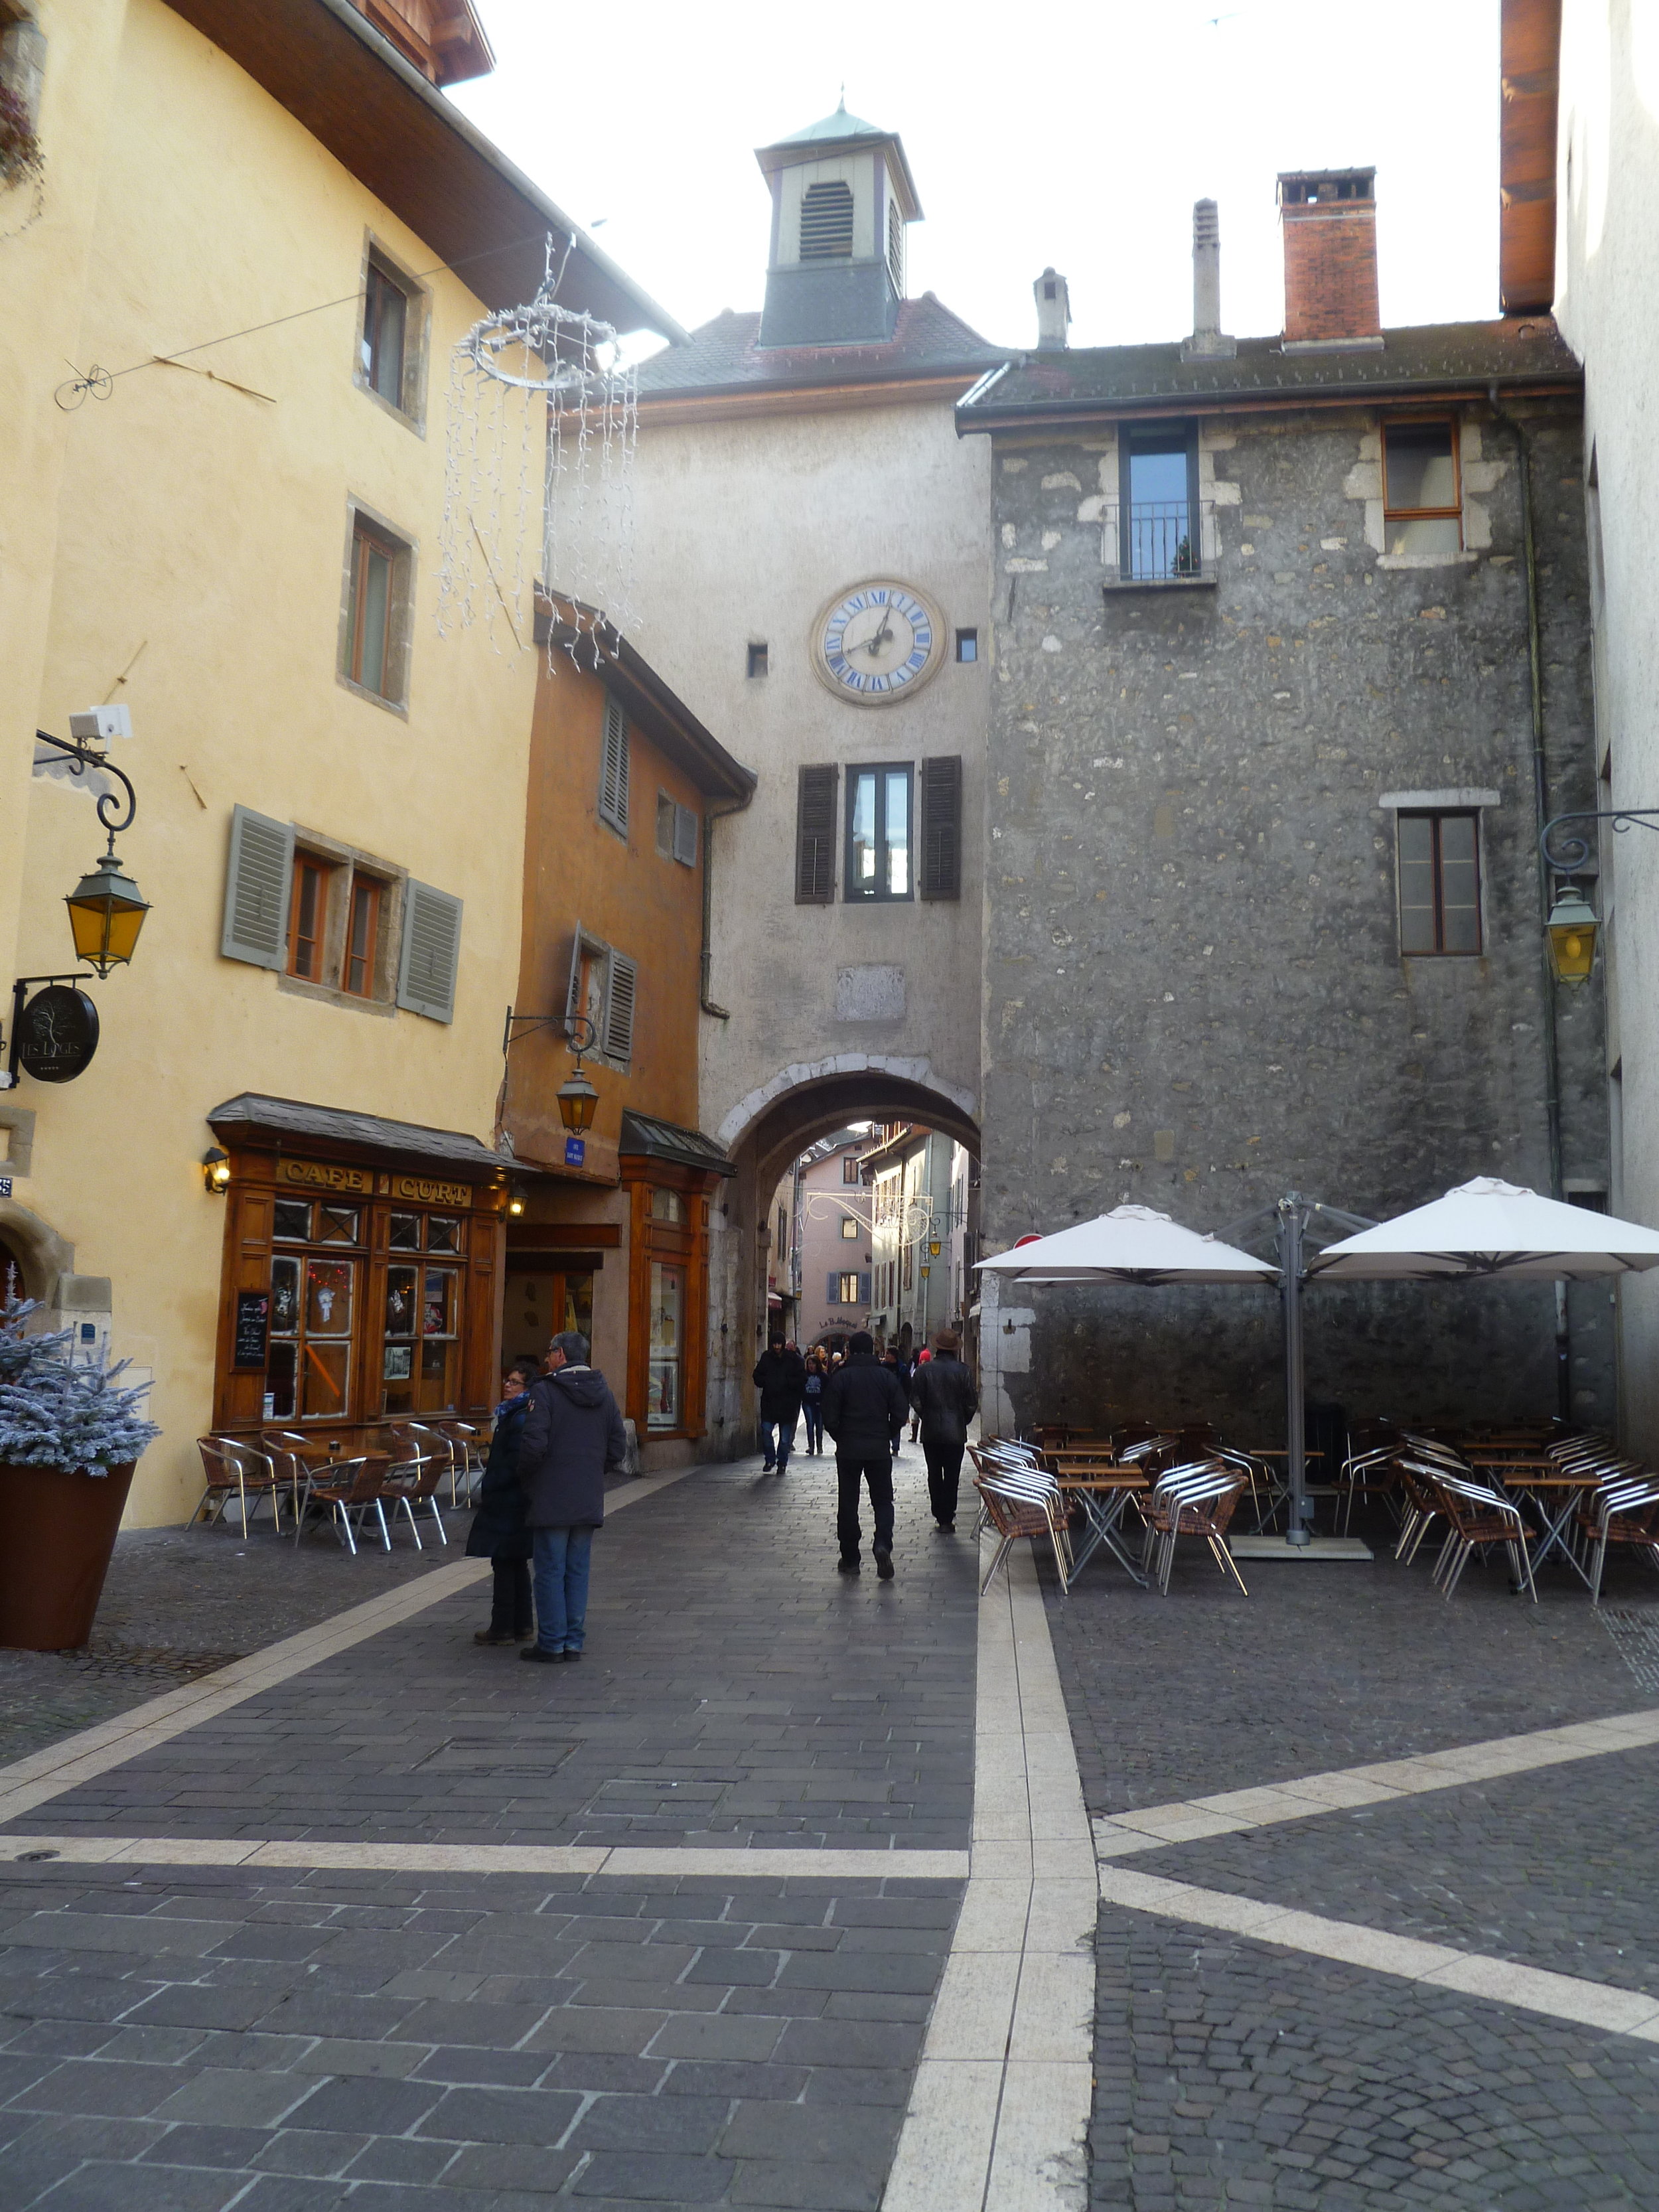 Another part of the old city with a clock tower.